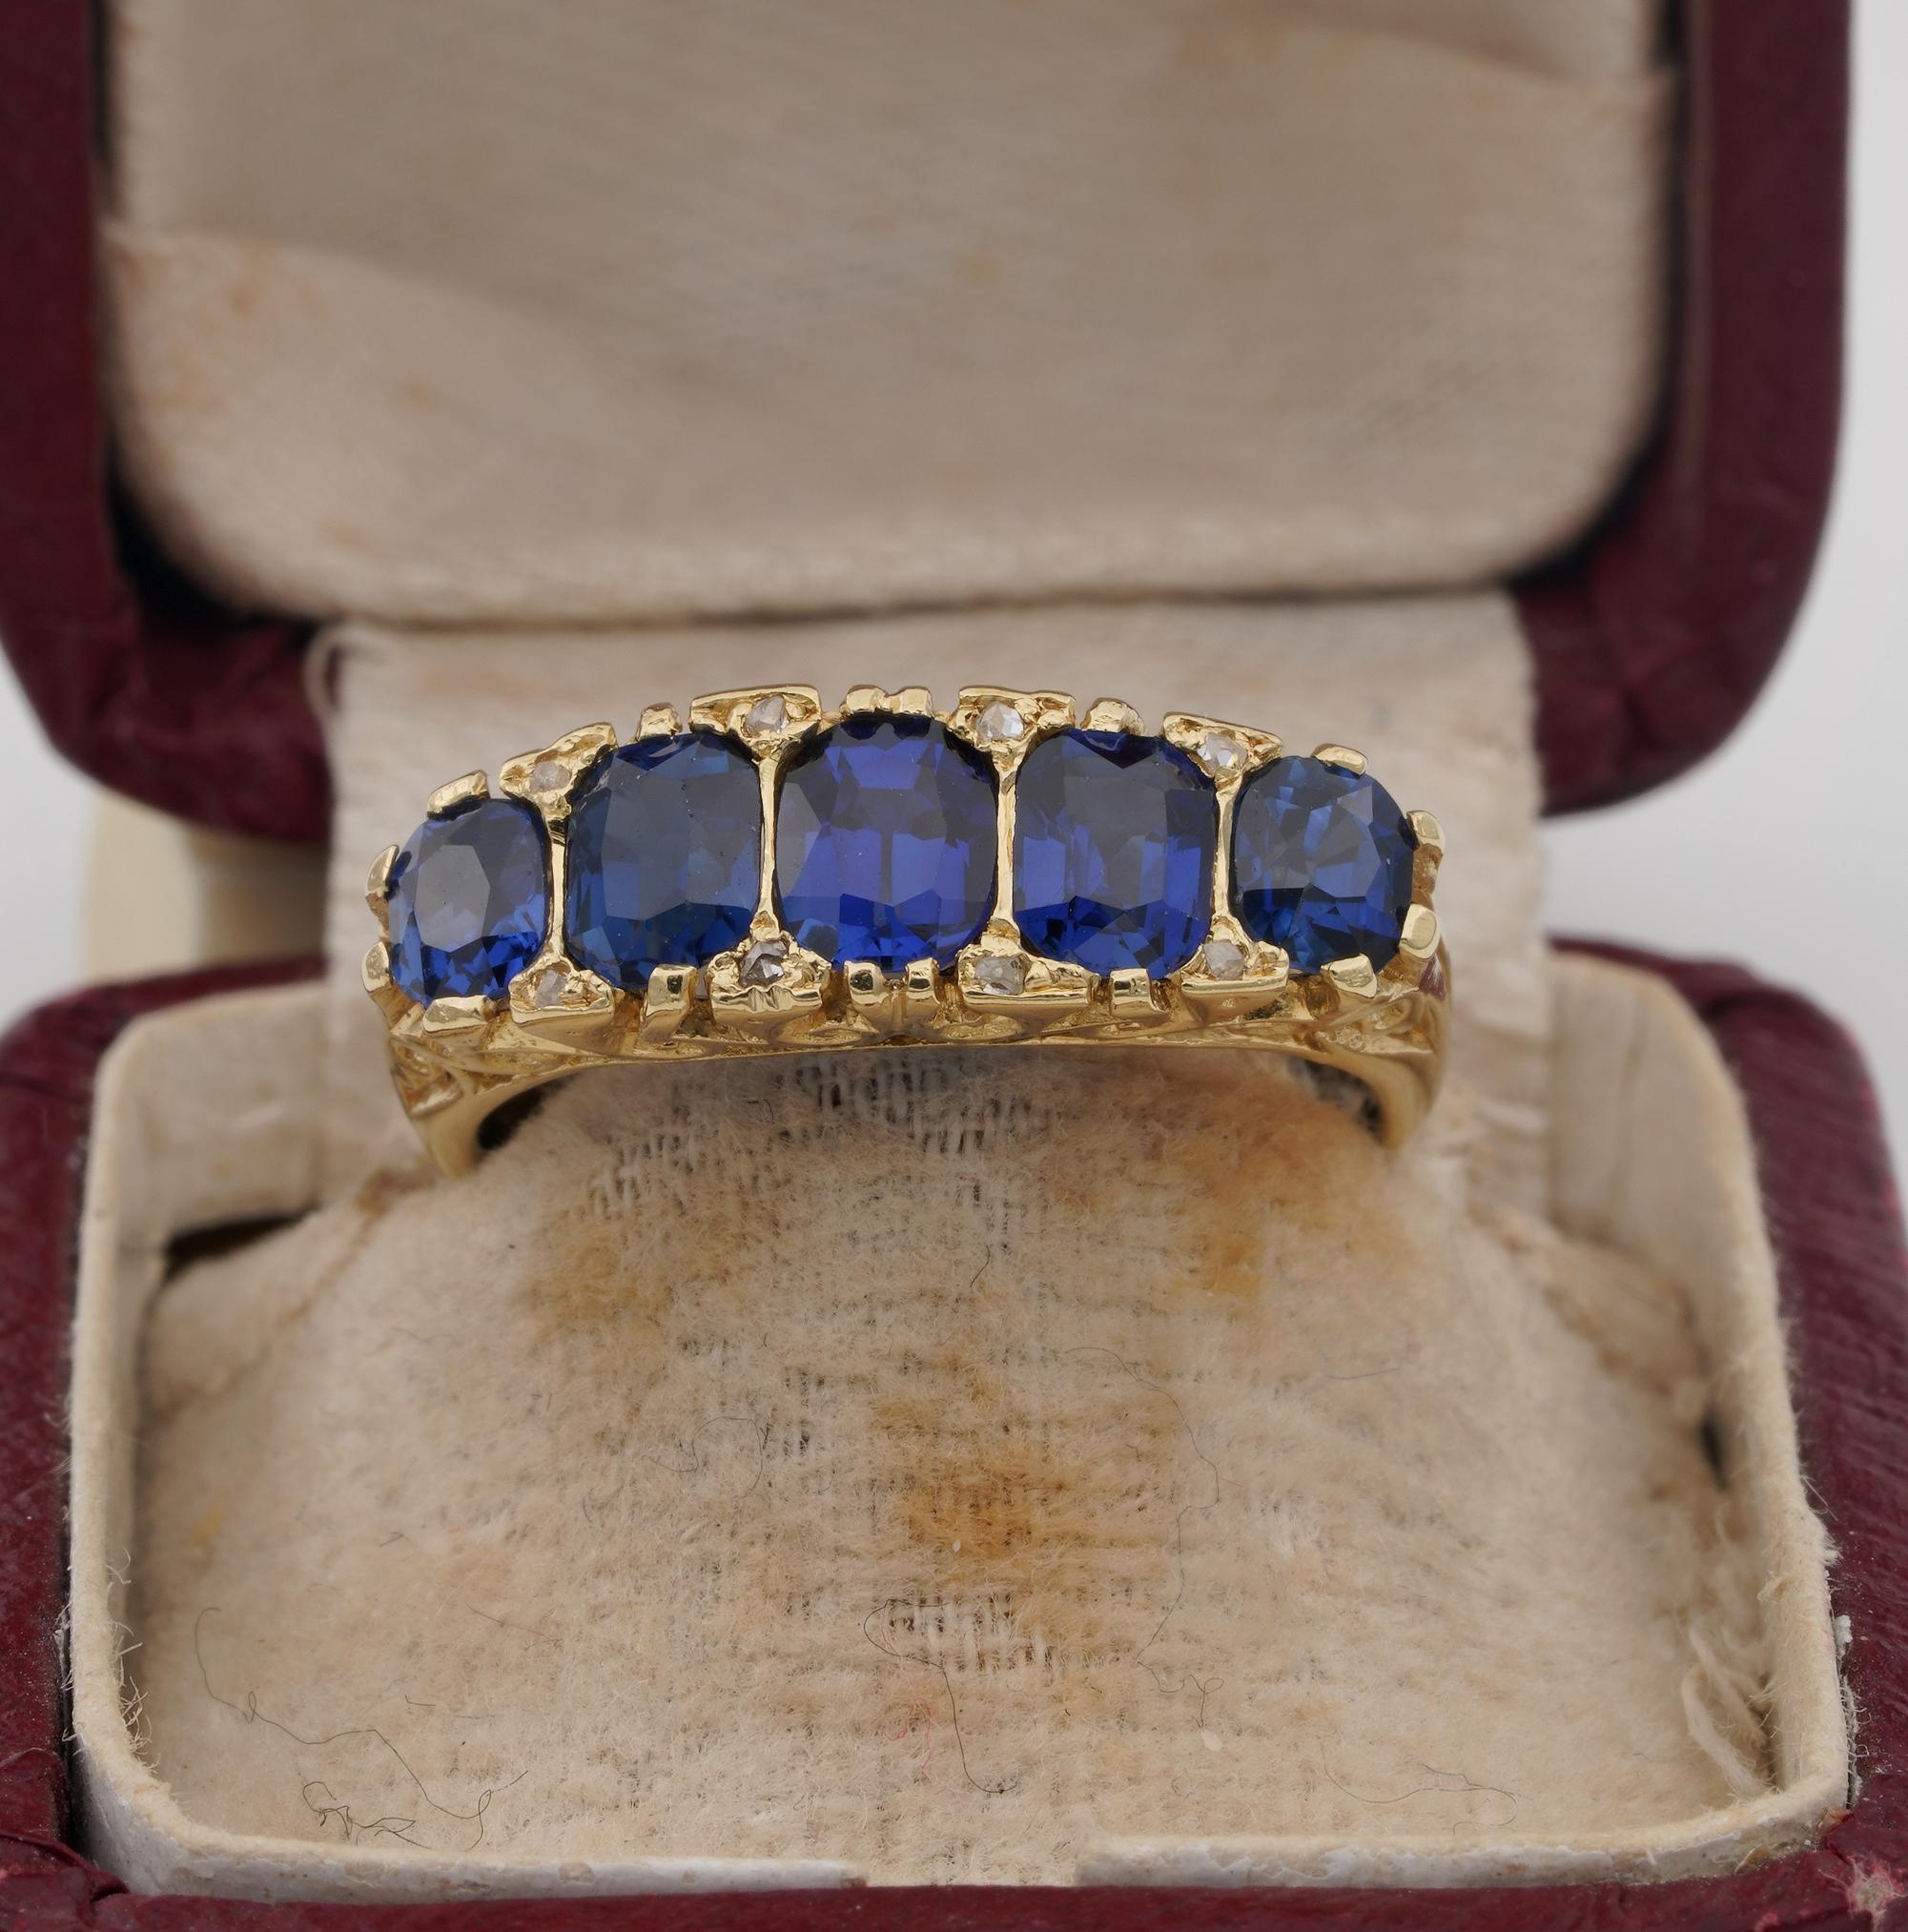 Into the Blue
Beautiful Victorian period five stone ring in a classy half hoop setting of the era
18 KT mounting finely carved throughout with rich scroll details, bears French Import duty Hallmarks
Five beautifully matched cushion-cut Natural